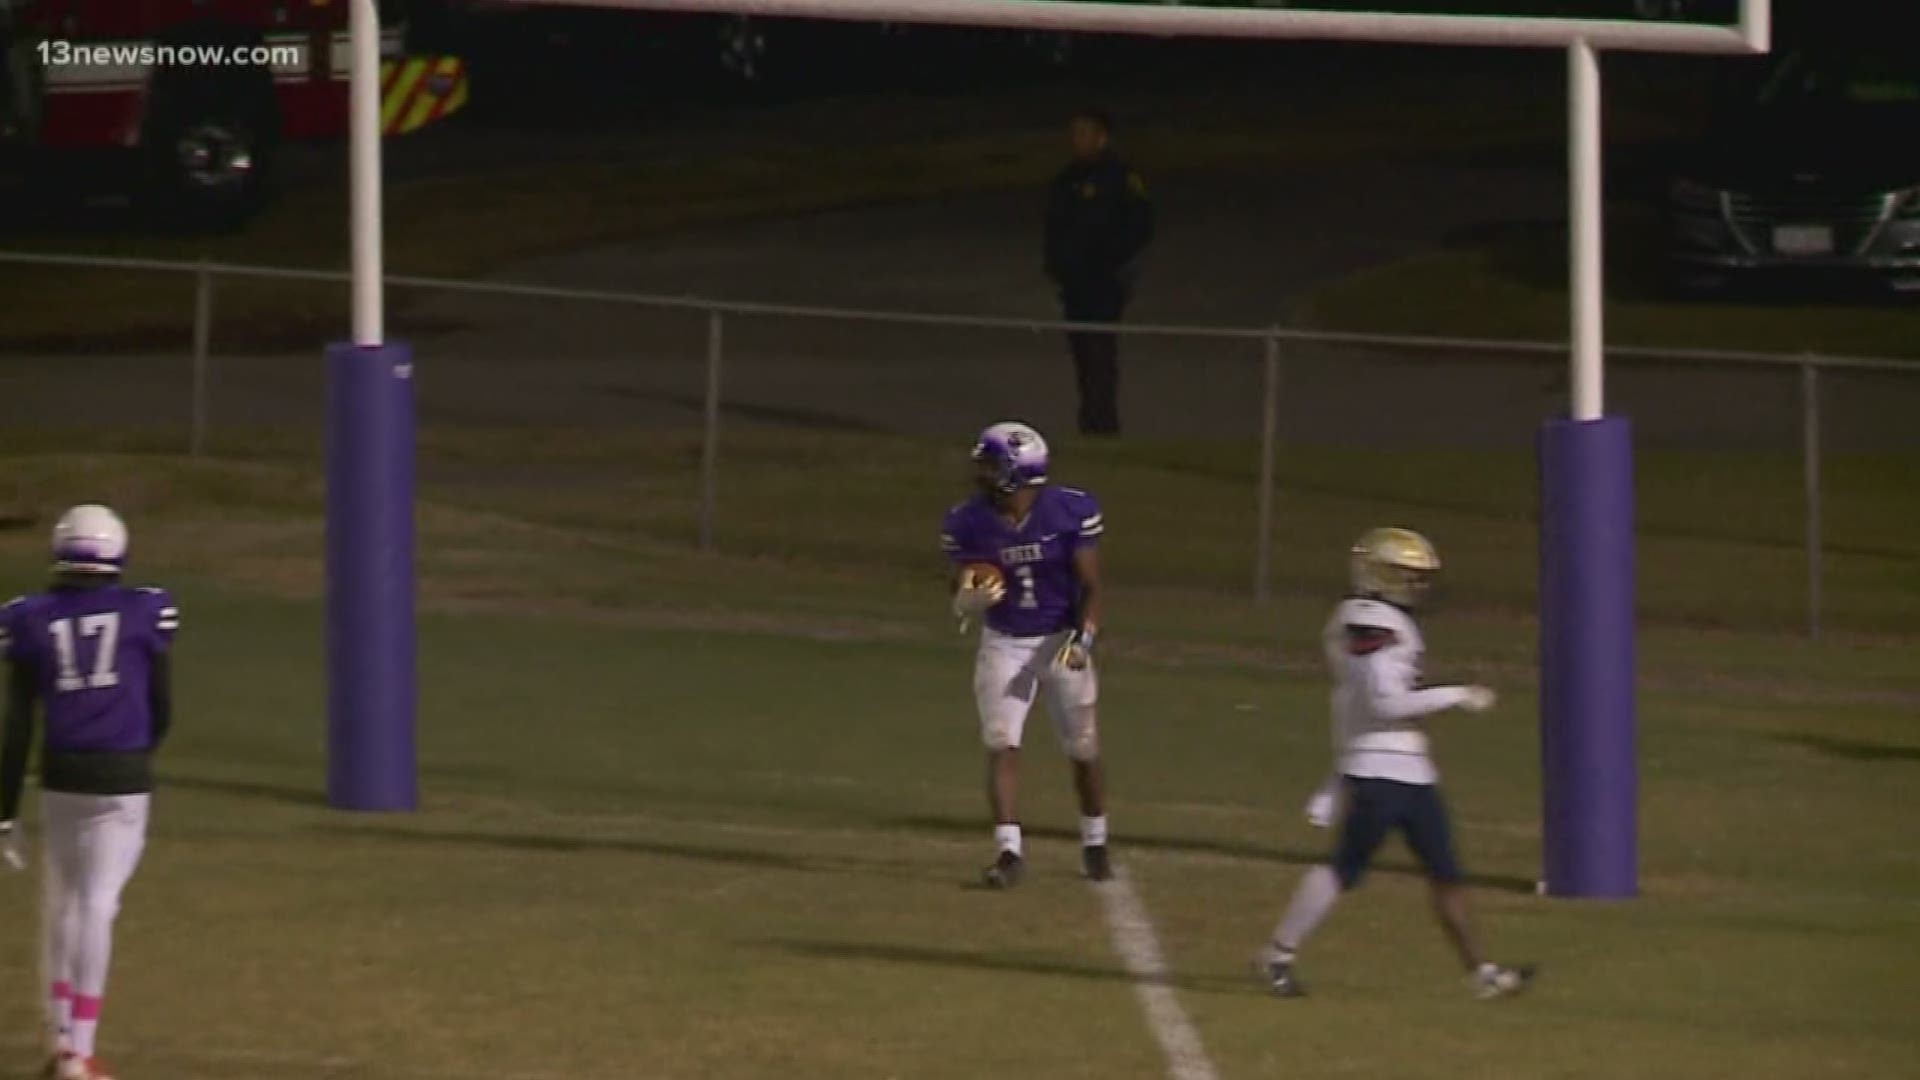 Deep Creek's wide receiver/running back tallied 4 TDs and 194 yards against Western Branch.